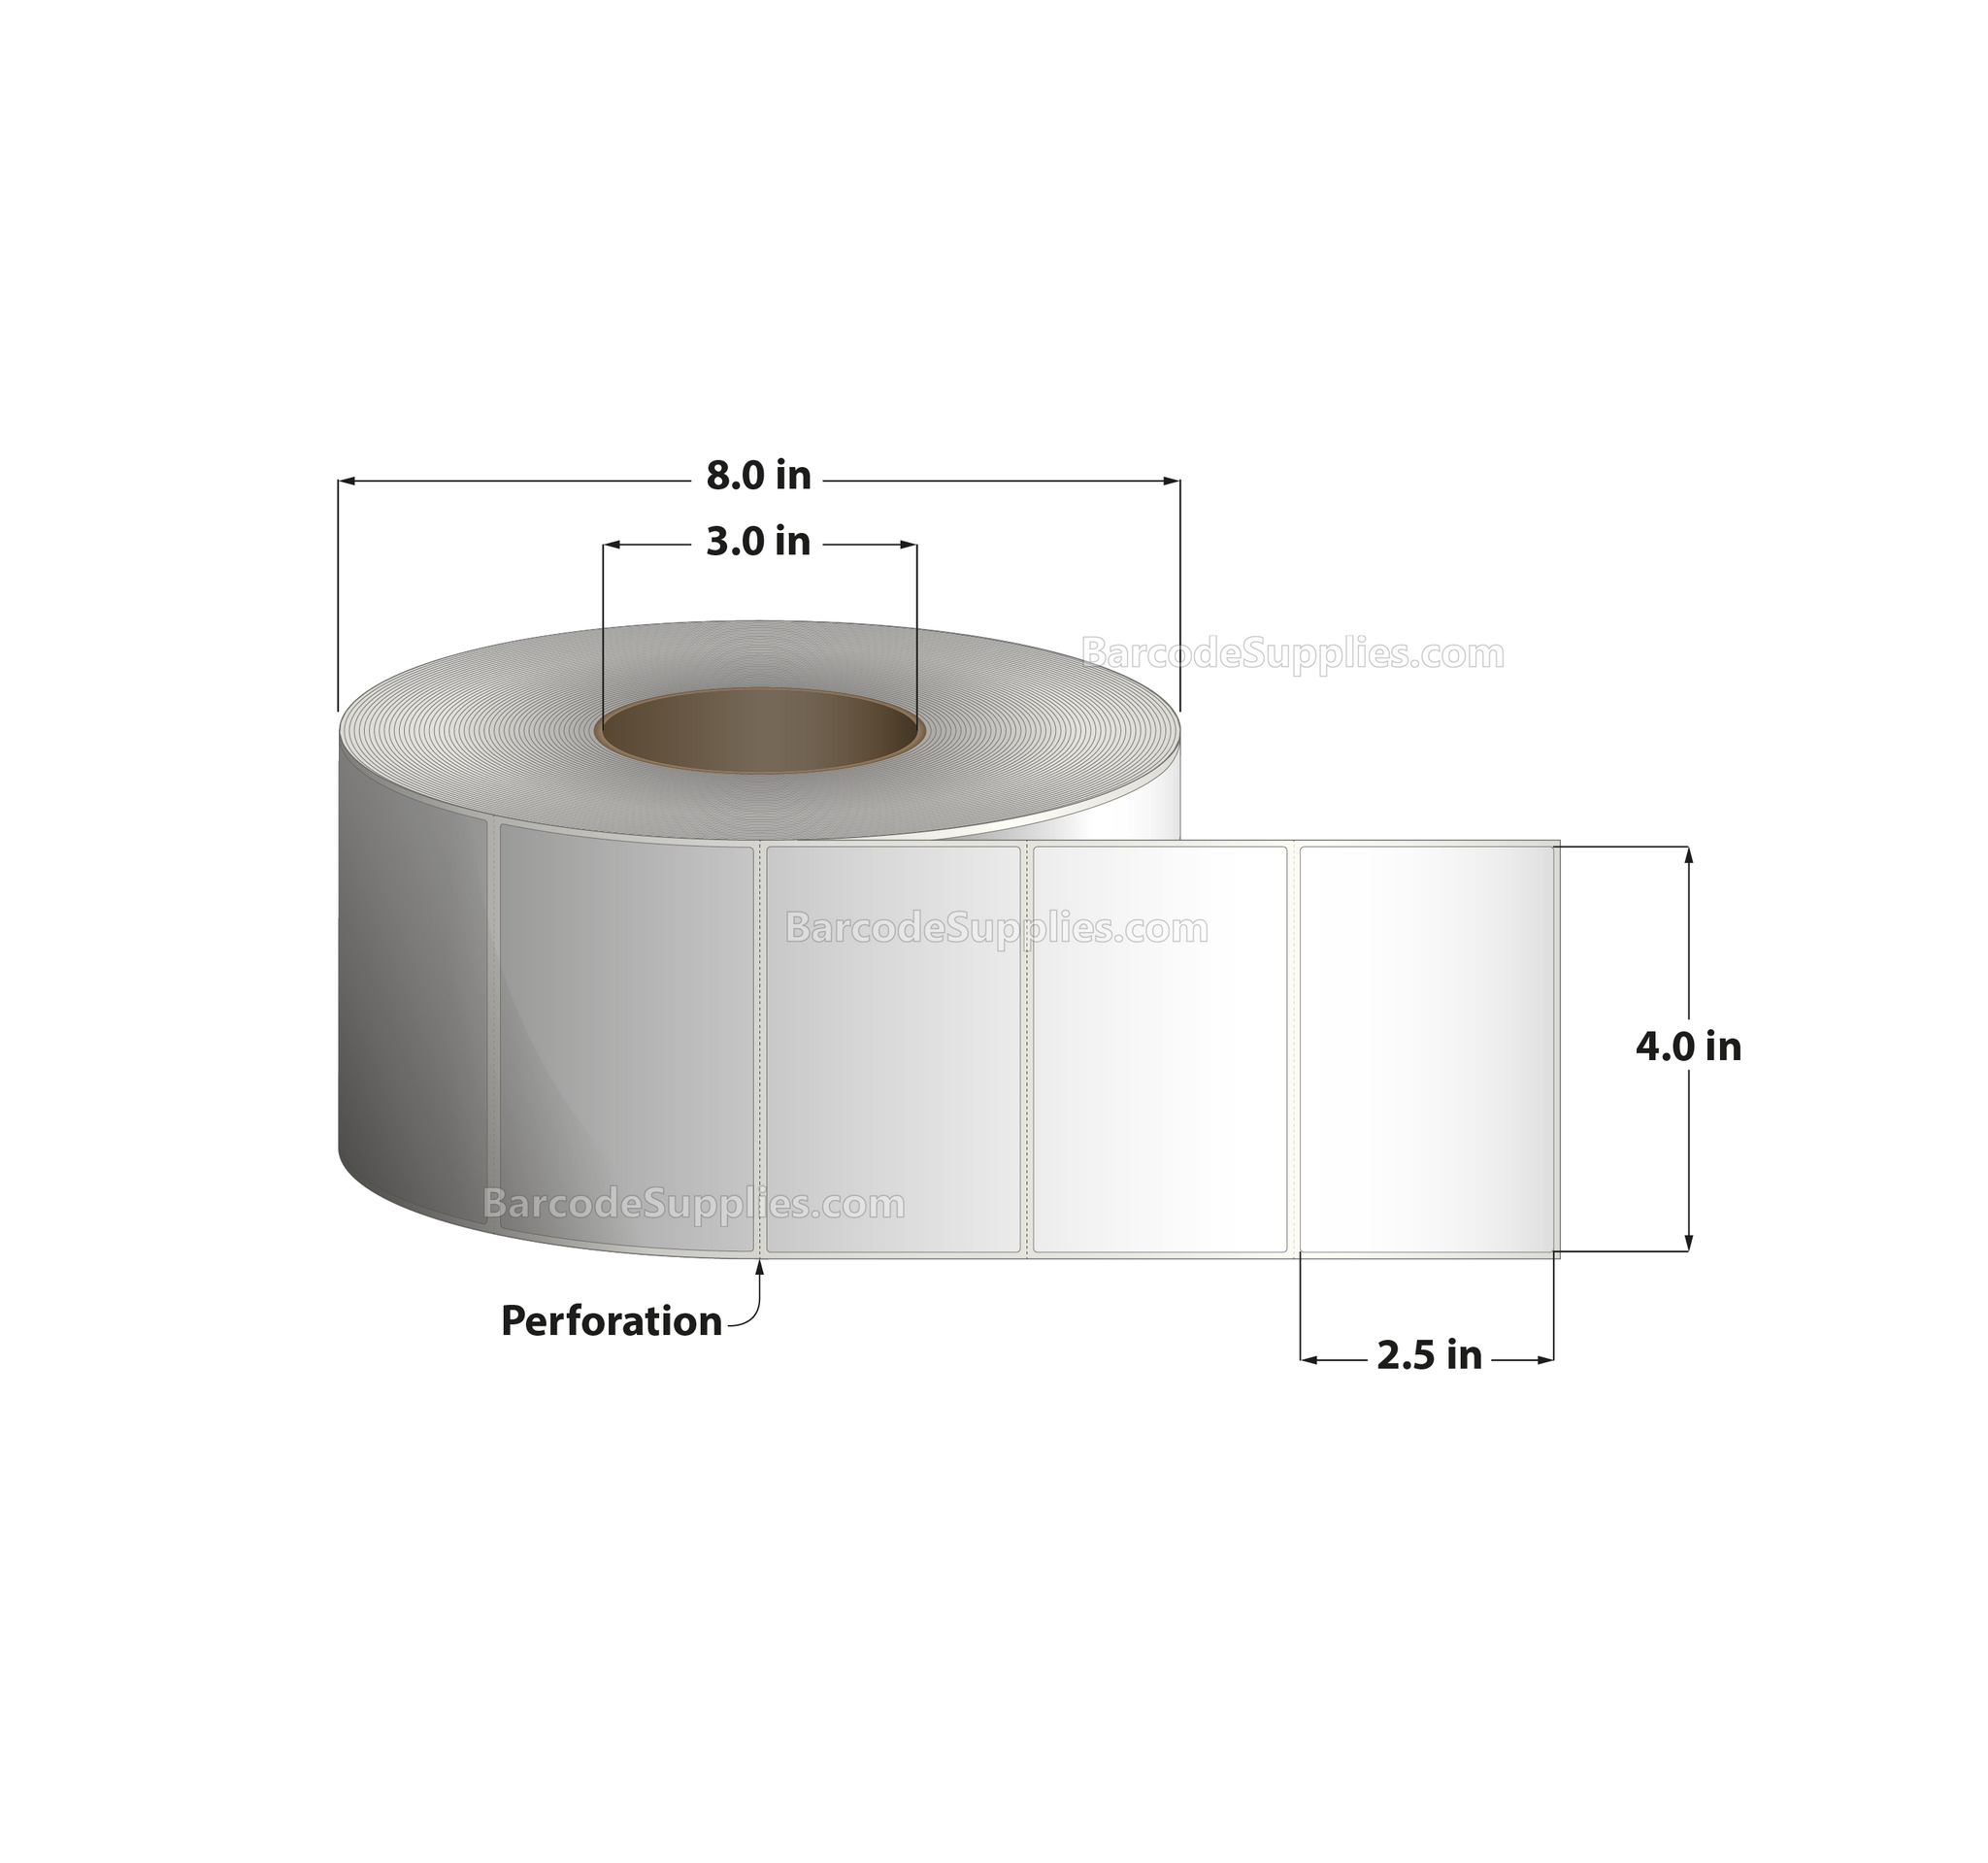 4 x 2.5 Direct Thermal White Labels With Acrylic Adhesive - Perforated - 2500 Labels Per Roll - Carton Of 4 Rolls - 10000 Labels Total - MPN: RD-4-25-2500-3 - BarcodeSource, Inc.